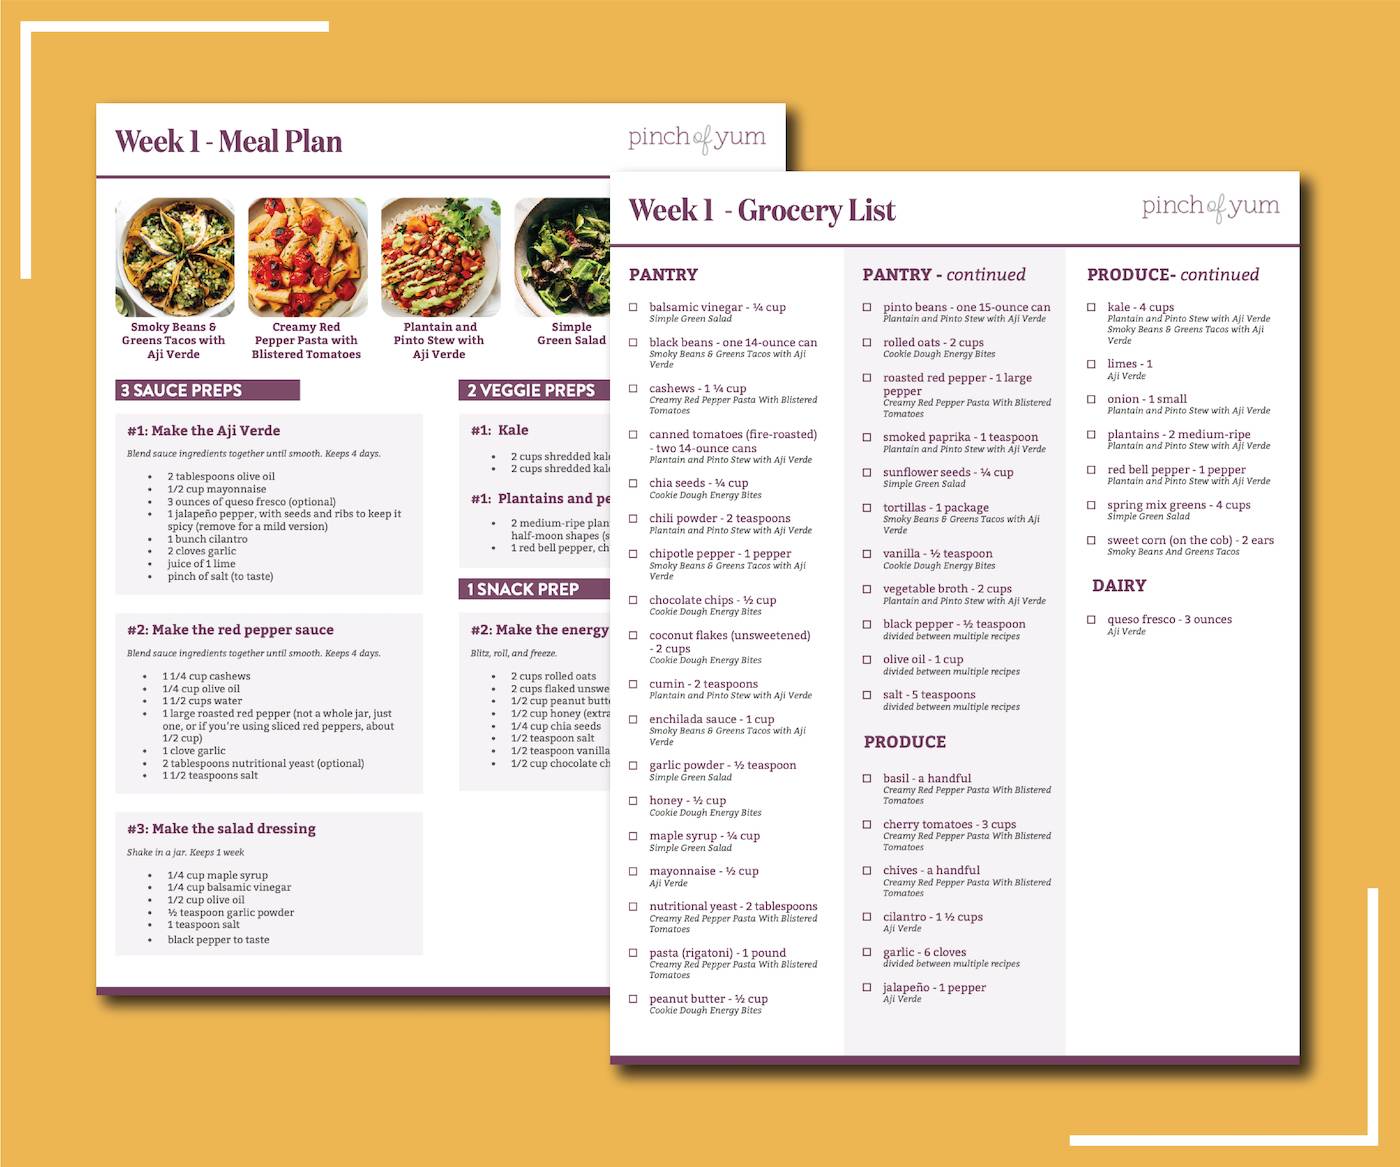 Meal Planning Guide and Grocery List